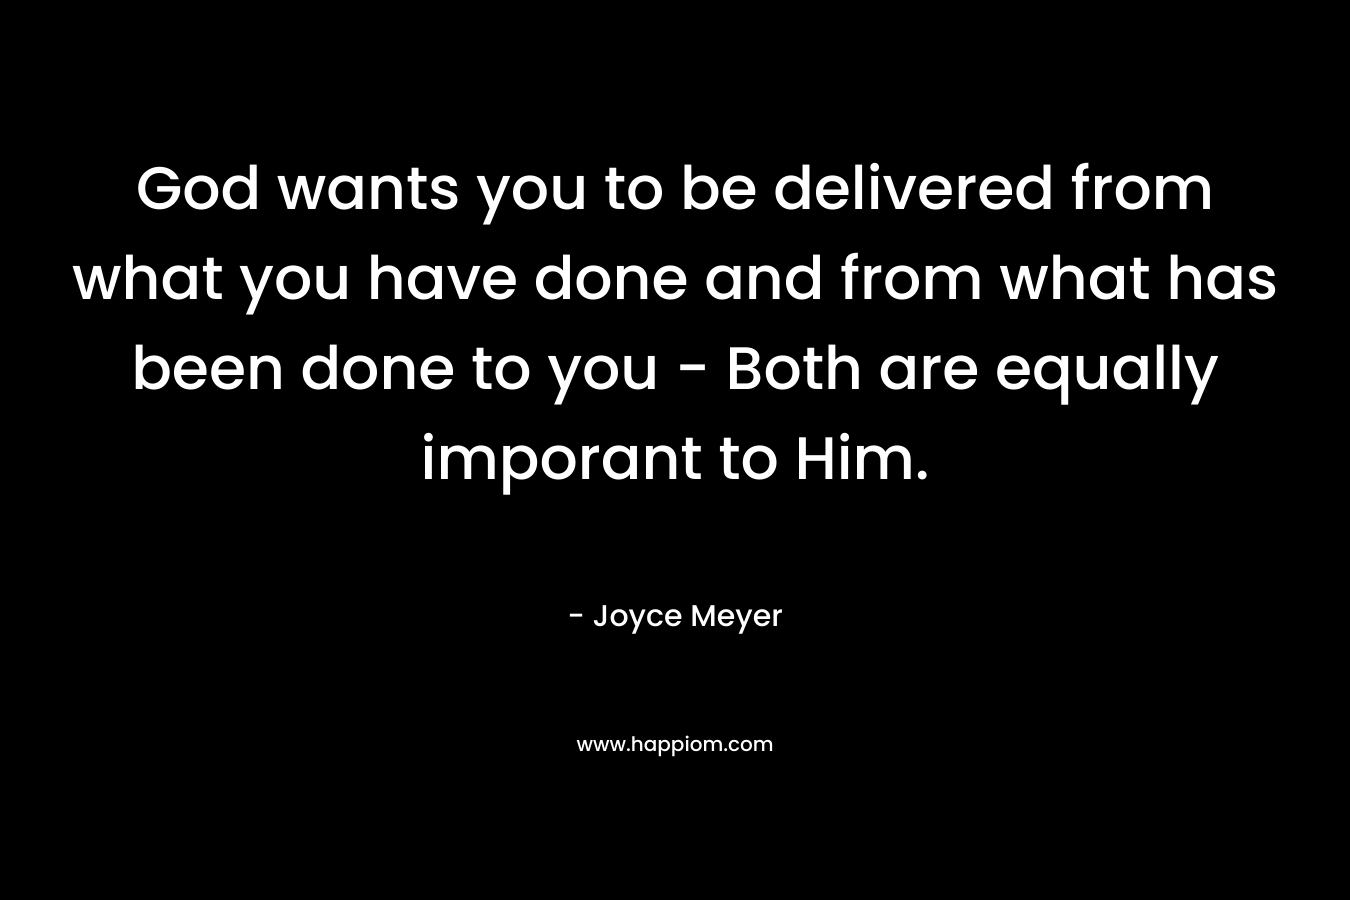 God wants you to be delivered from what you have done and from what has been done to you – Both are equally imporant to Him. – Joyce Meyer